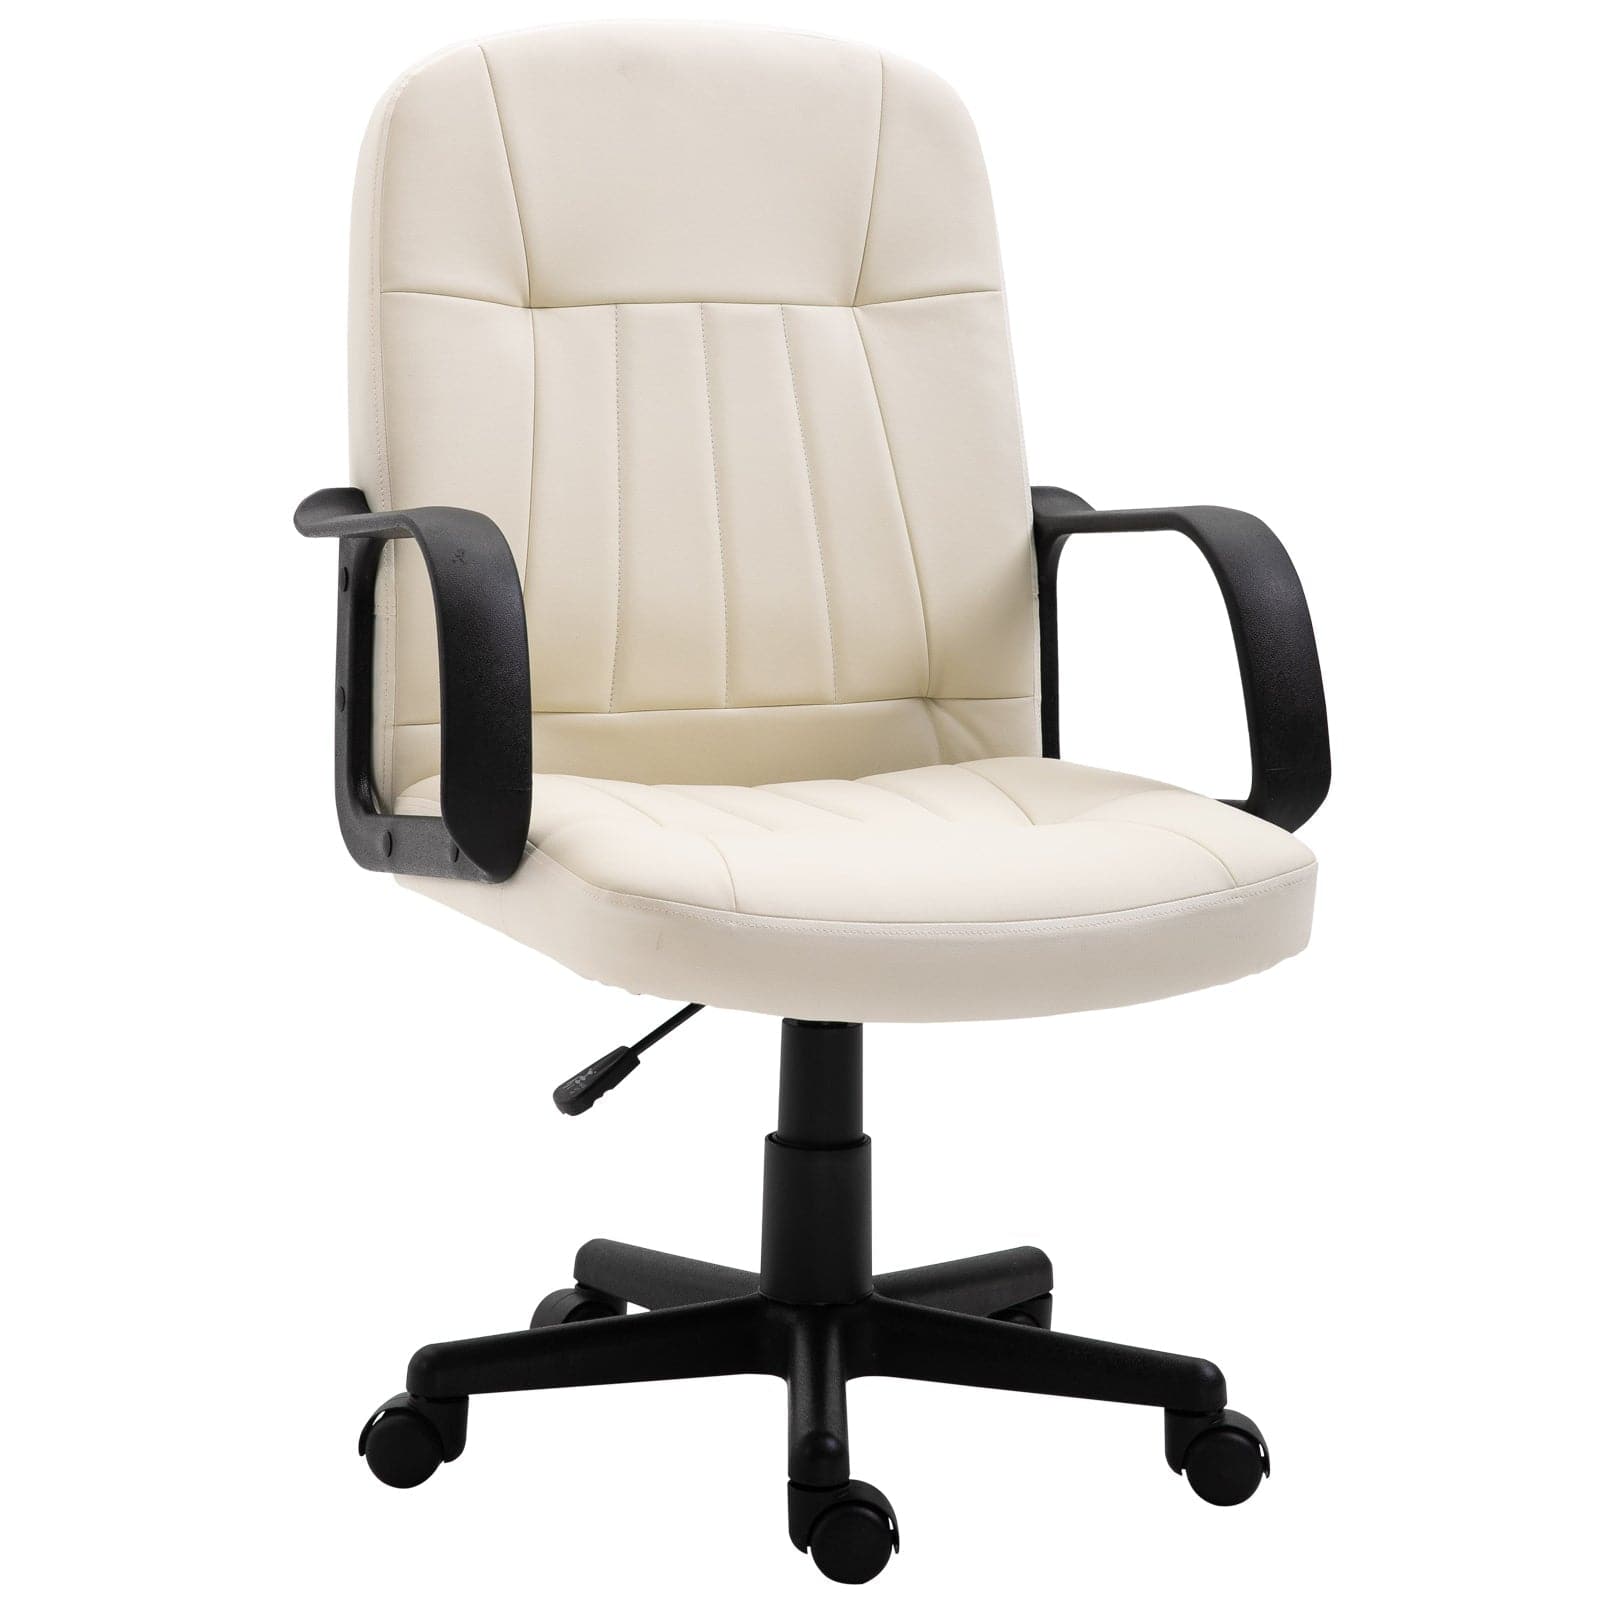 ProperAV Extra PU Leather Swivel Home Office Chair with Armrest (Cream)